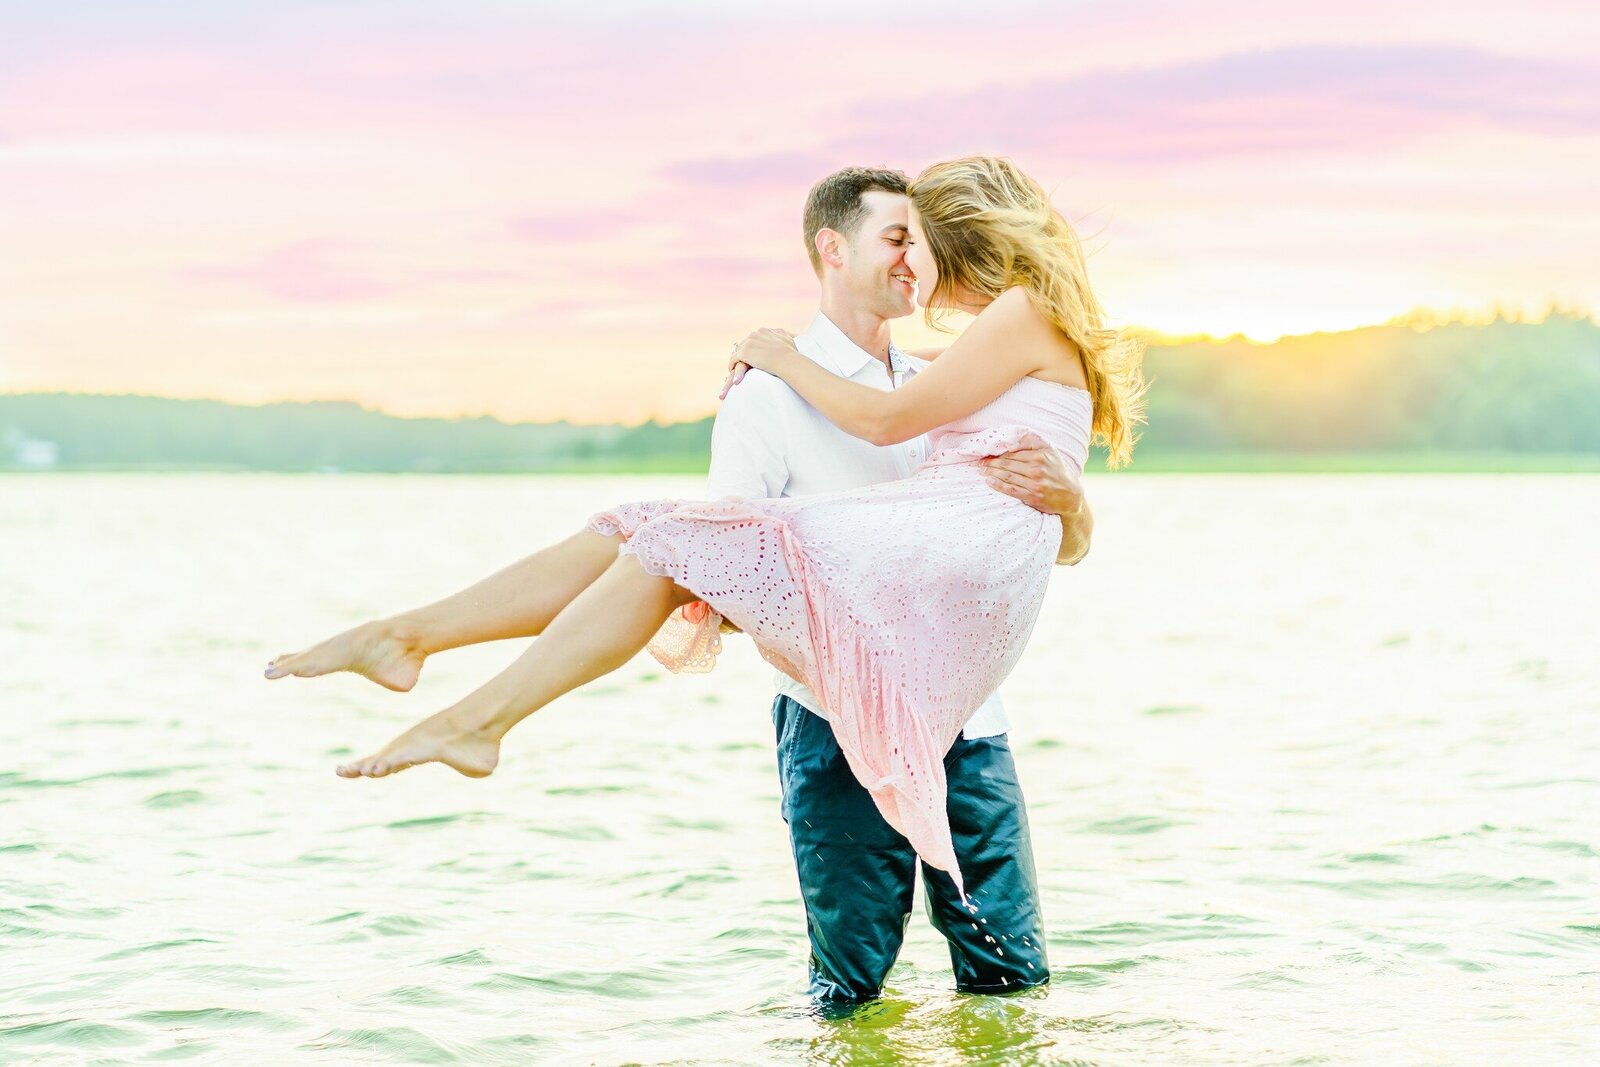 New England Area Couple standing in water smiling for engagement photos